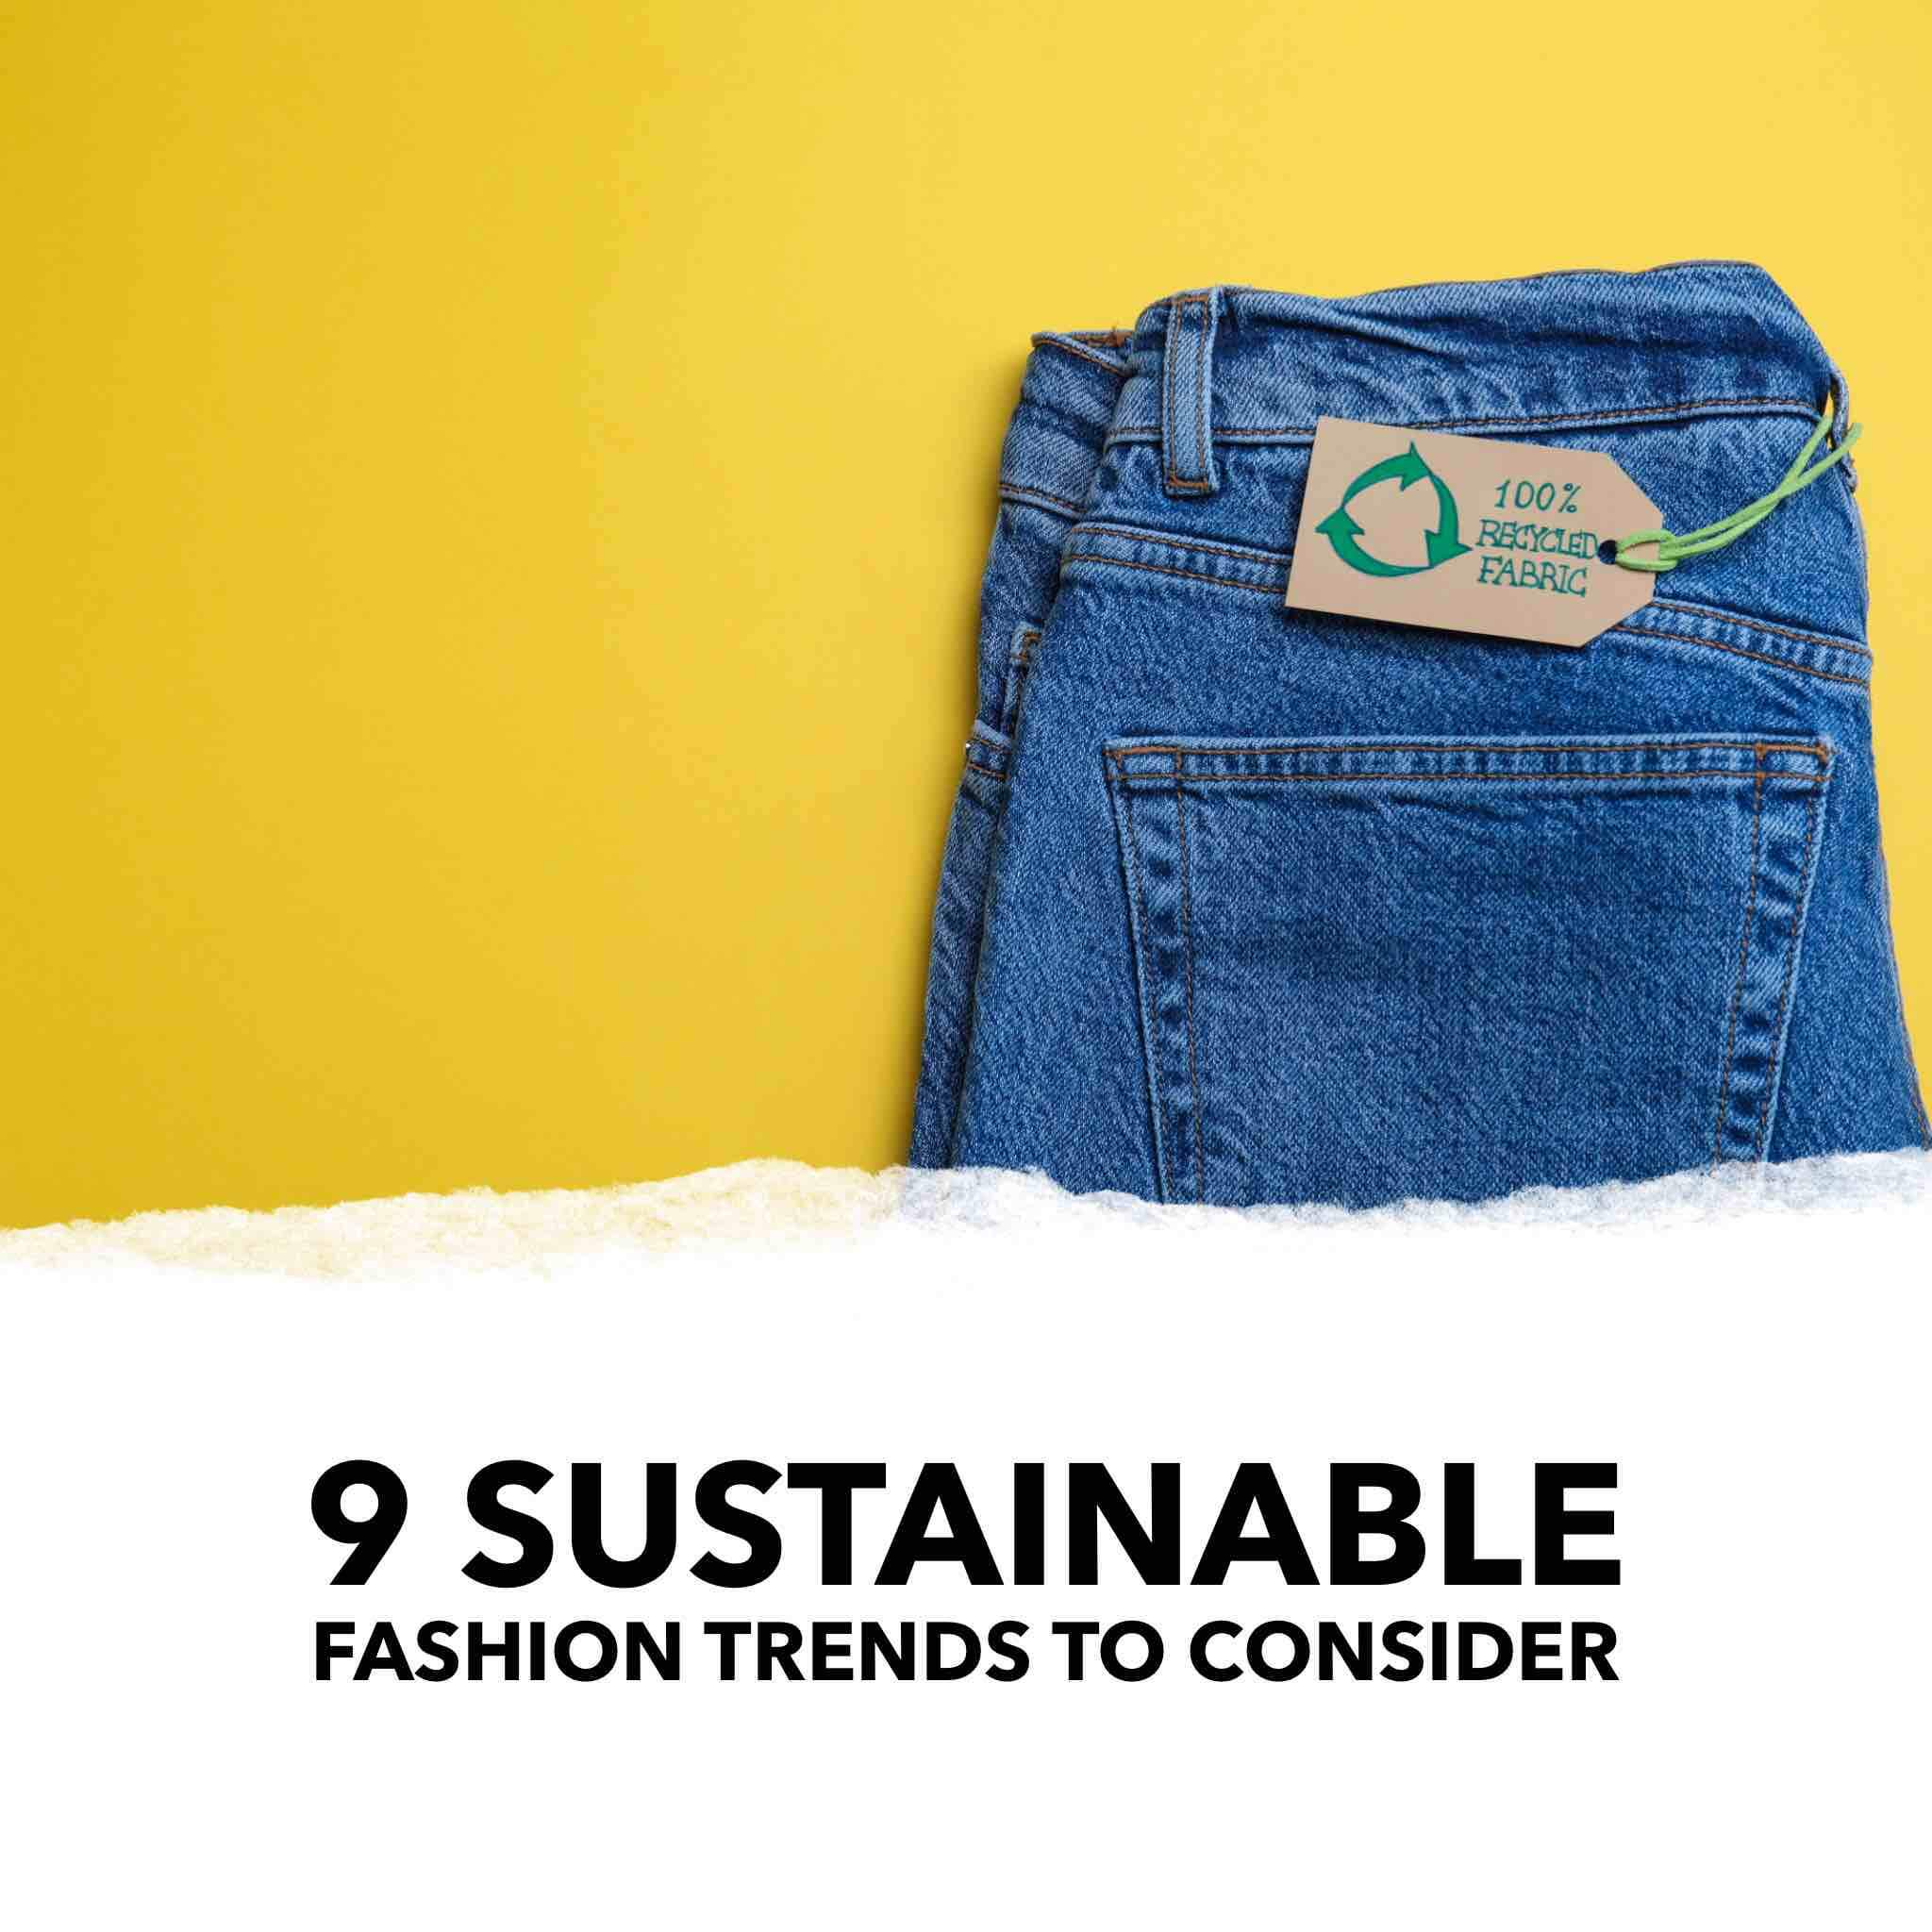 9 sustainable fashion trends to consider featured image